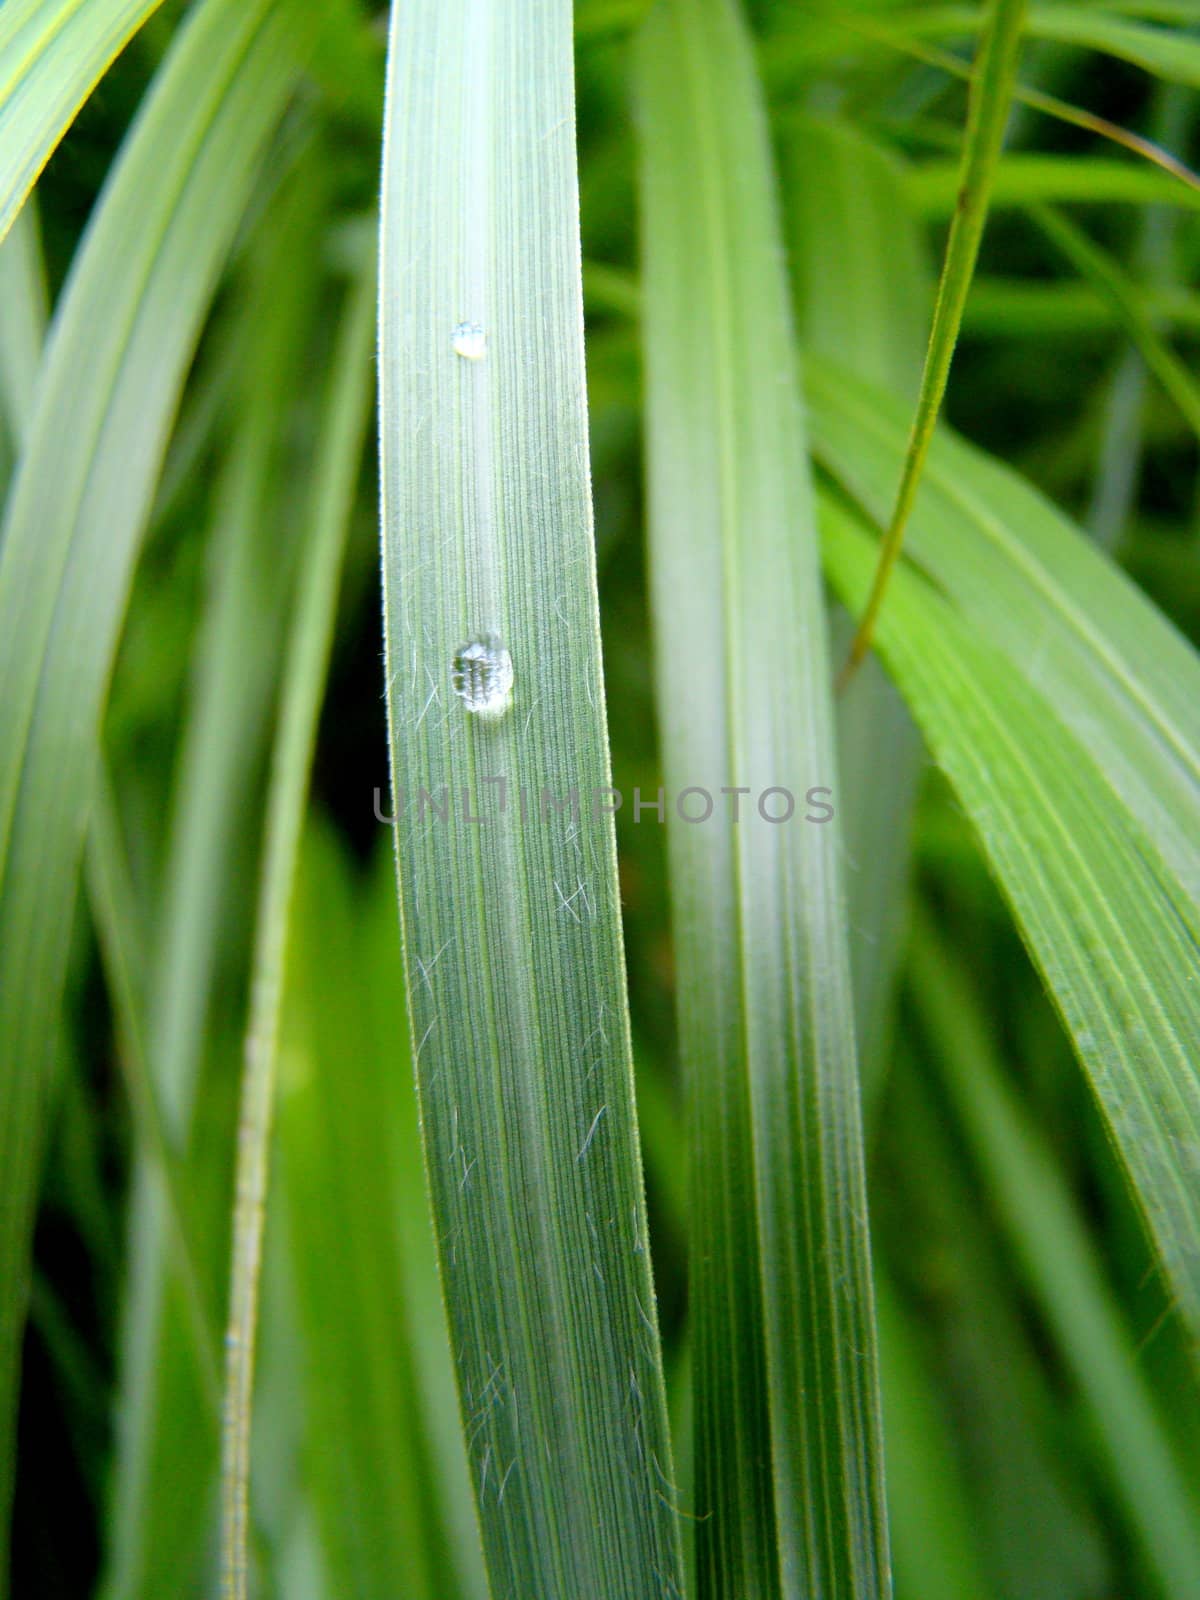 grass with one drop water up close